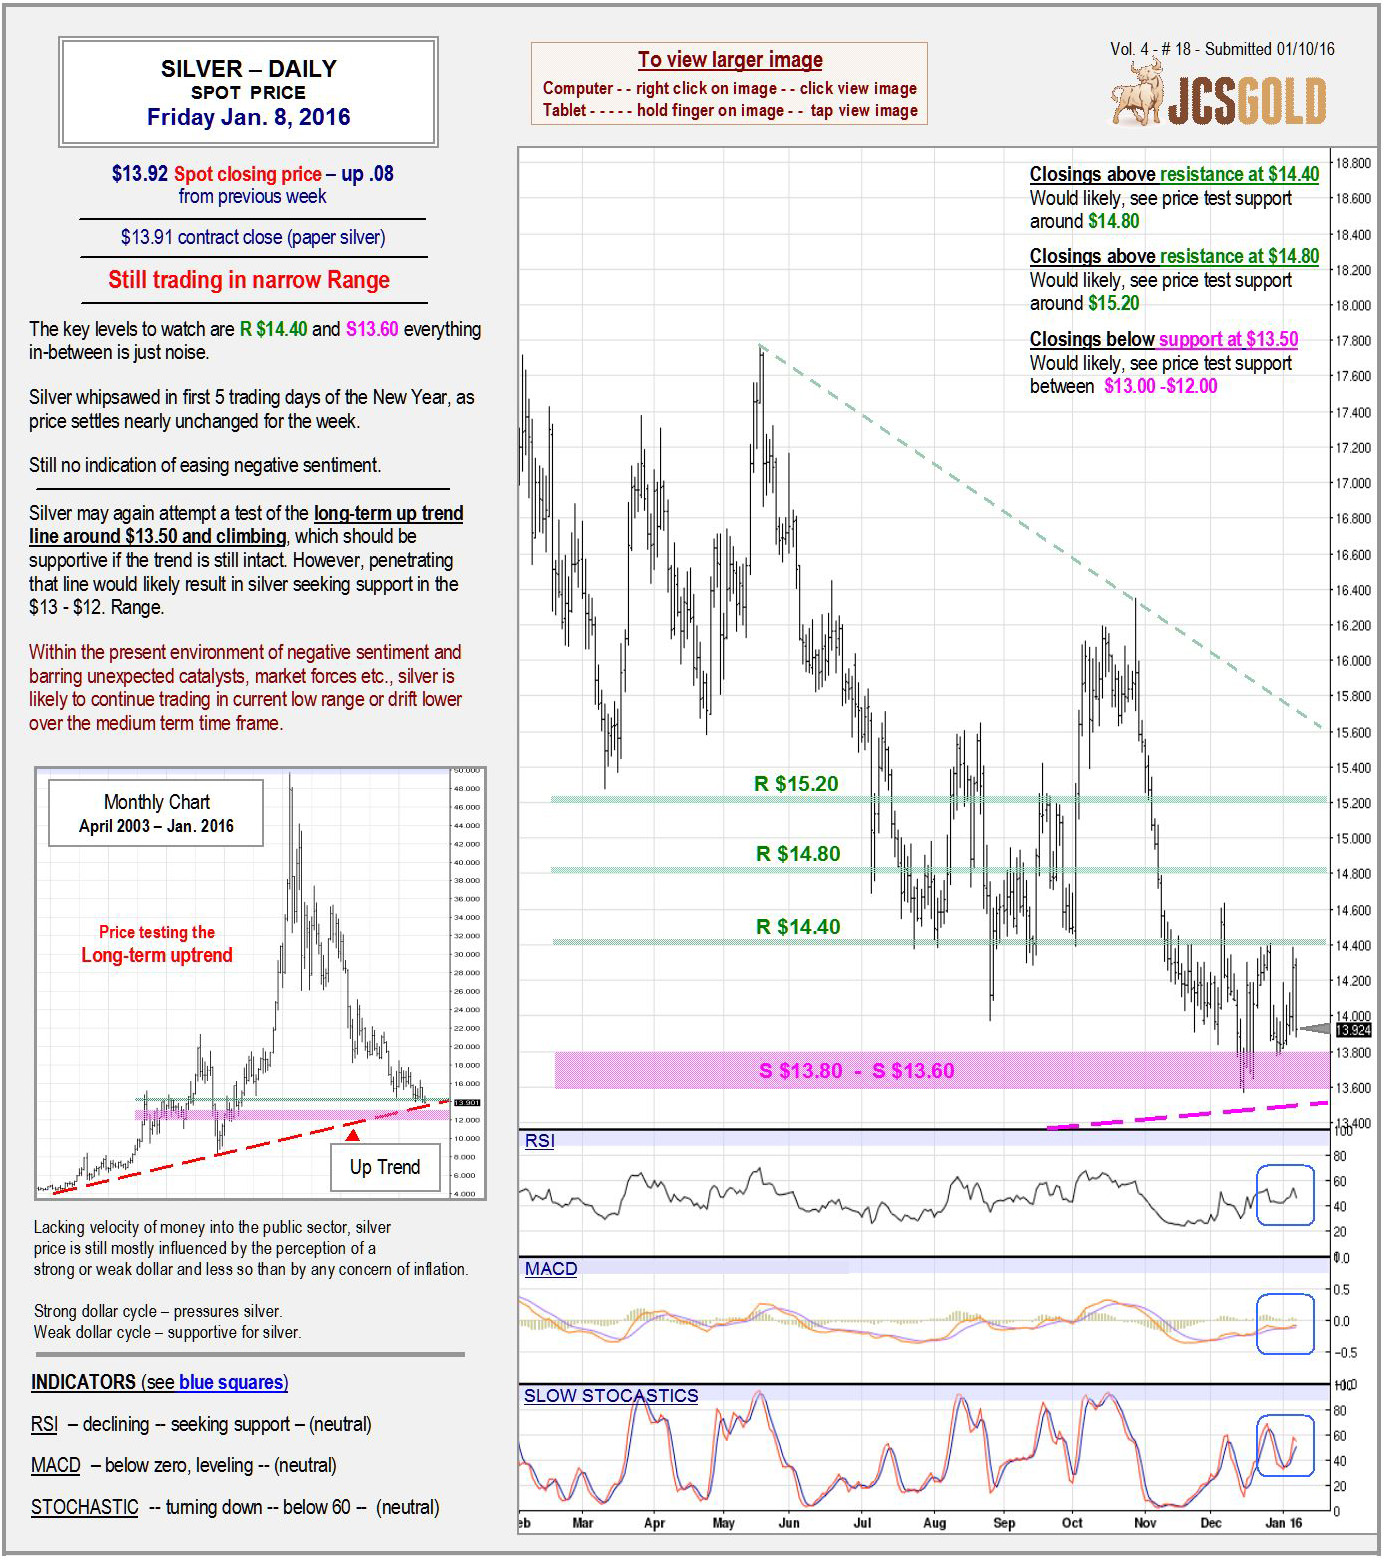 Jan 8, 2016 chart & commentary